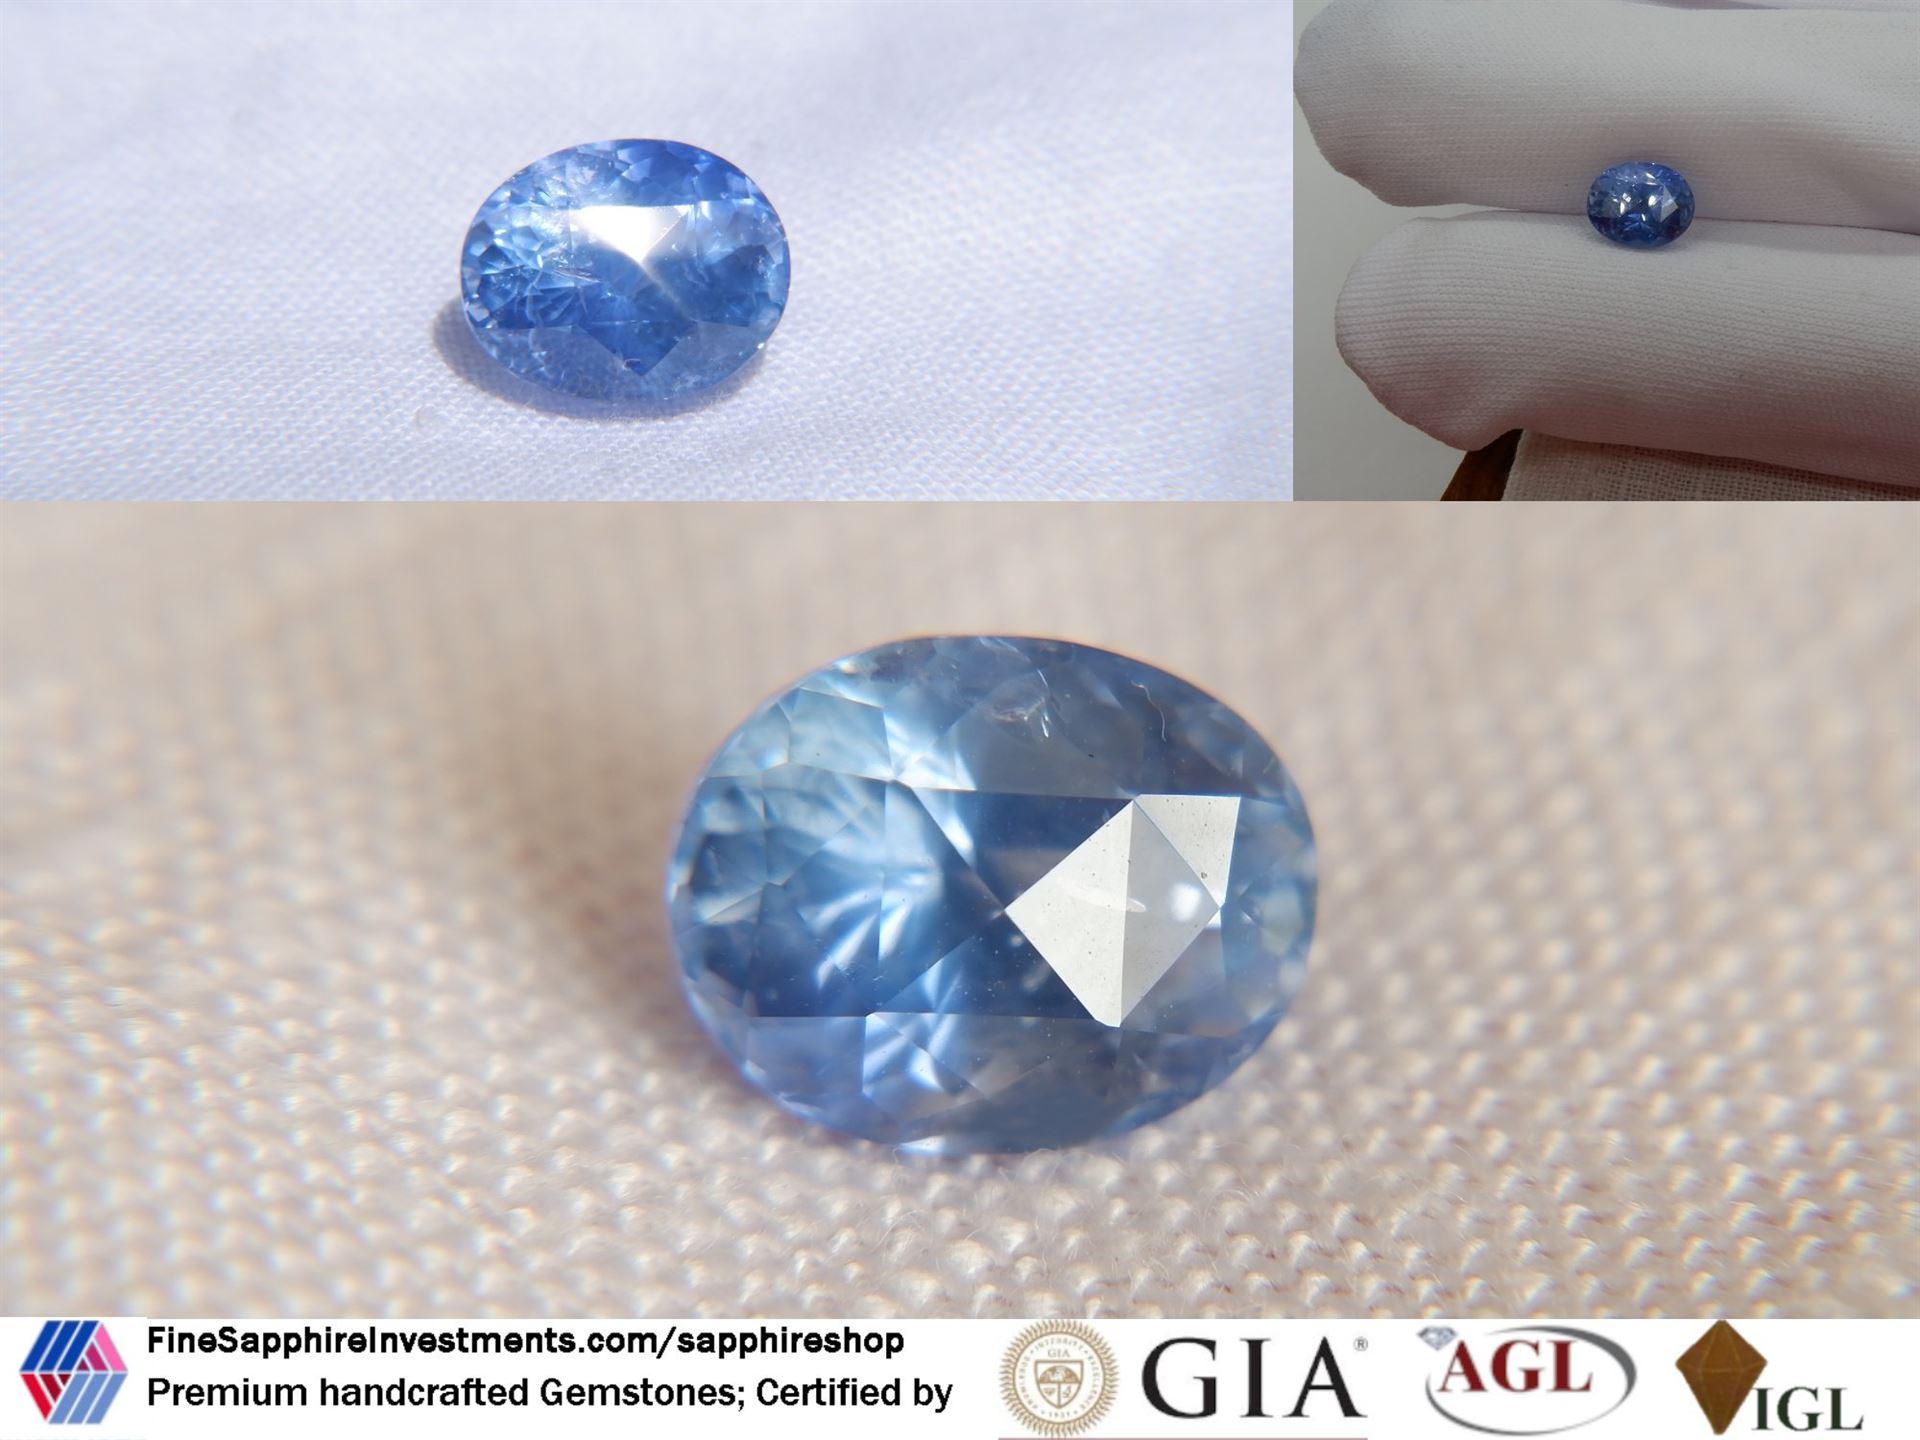 3.16 ct Vivid Blue Sapphire, Ceylon, Handcrafted, GIA For Sale 1